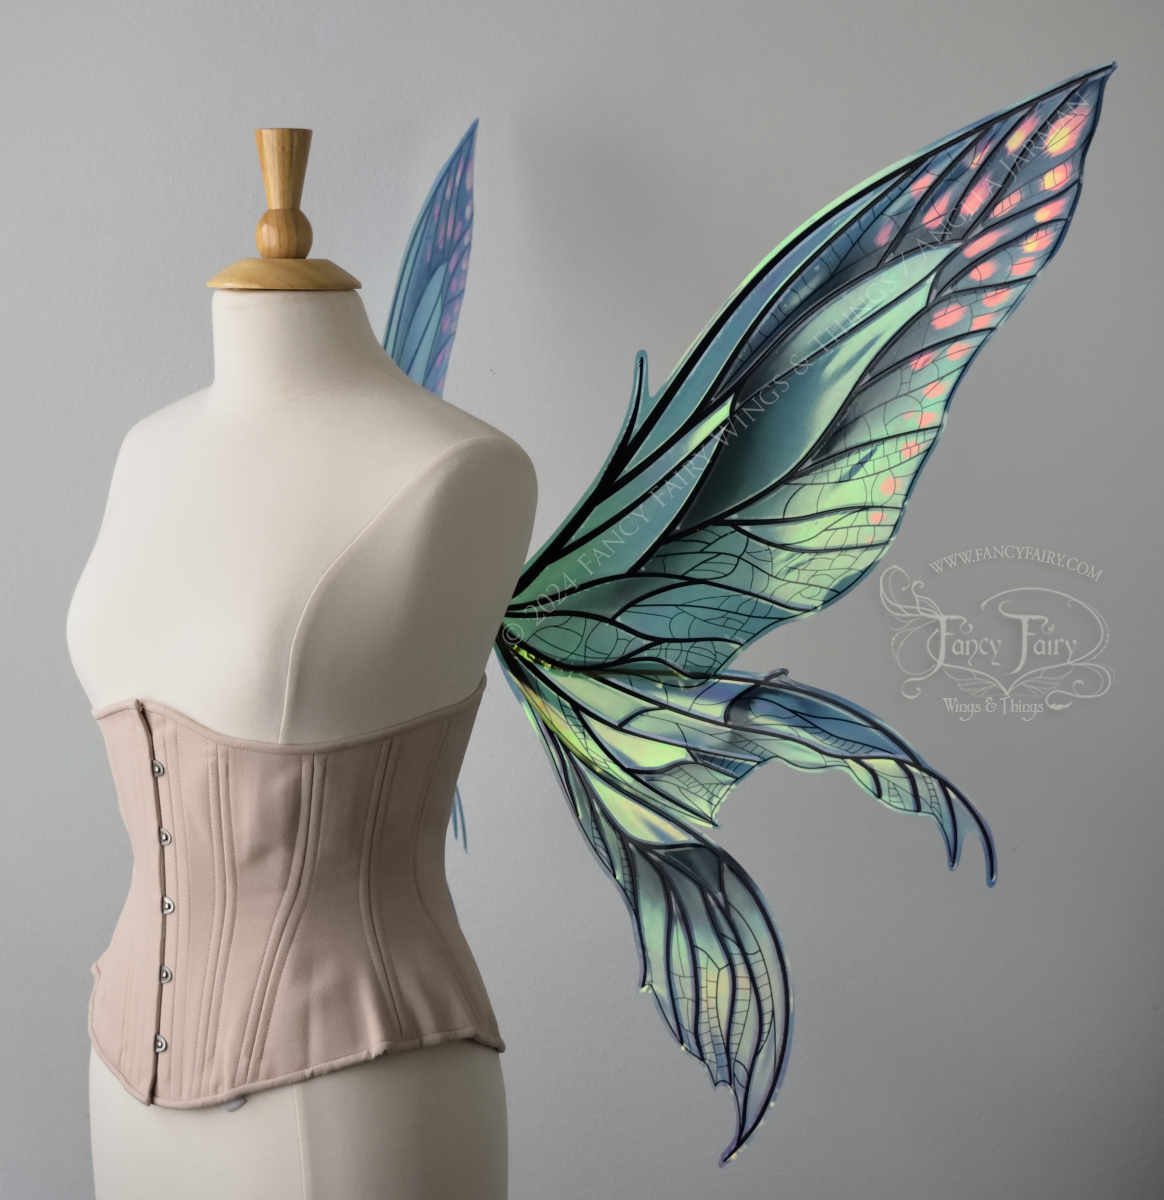 Right side view of large green & blue iridescent fairy wings with 3 panels on each side, pointed tips, lots of veins, worn on a dress form